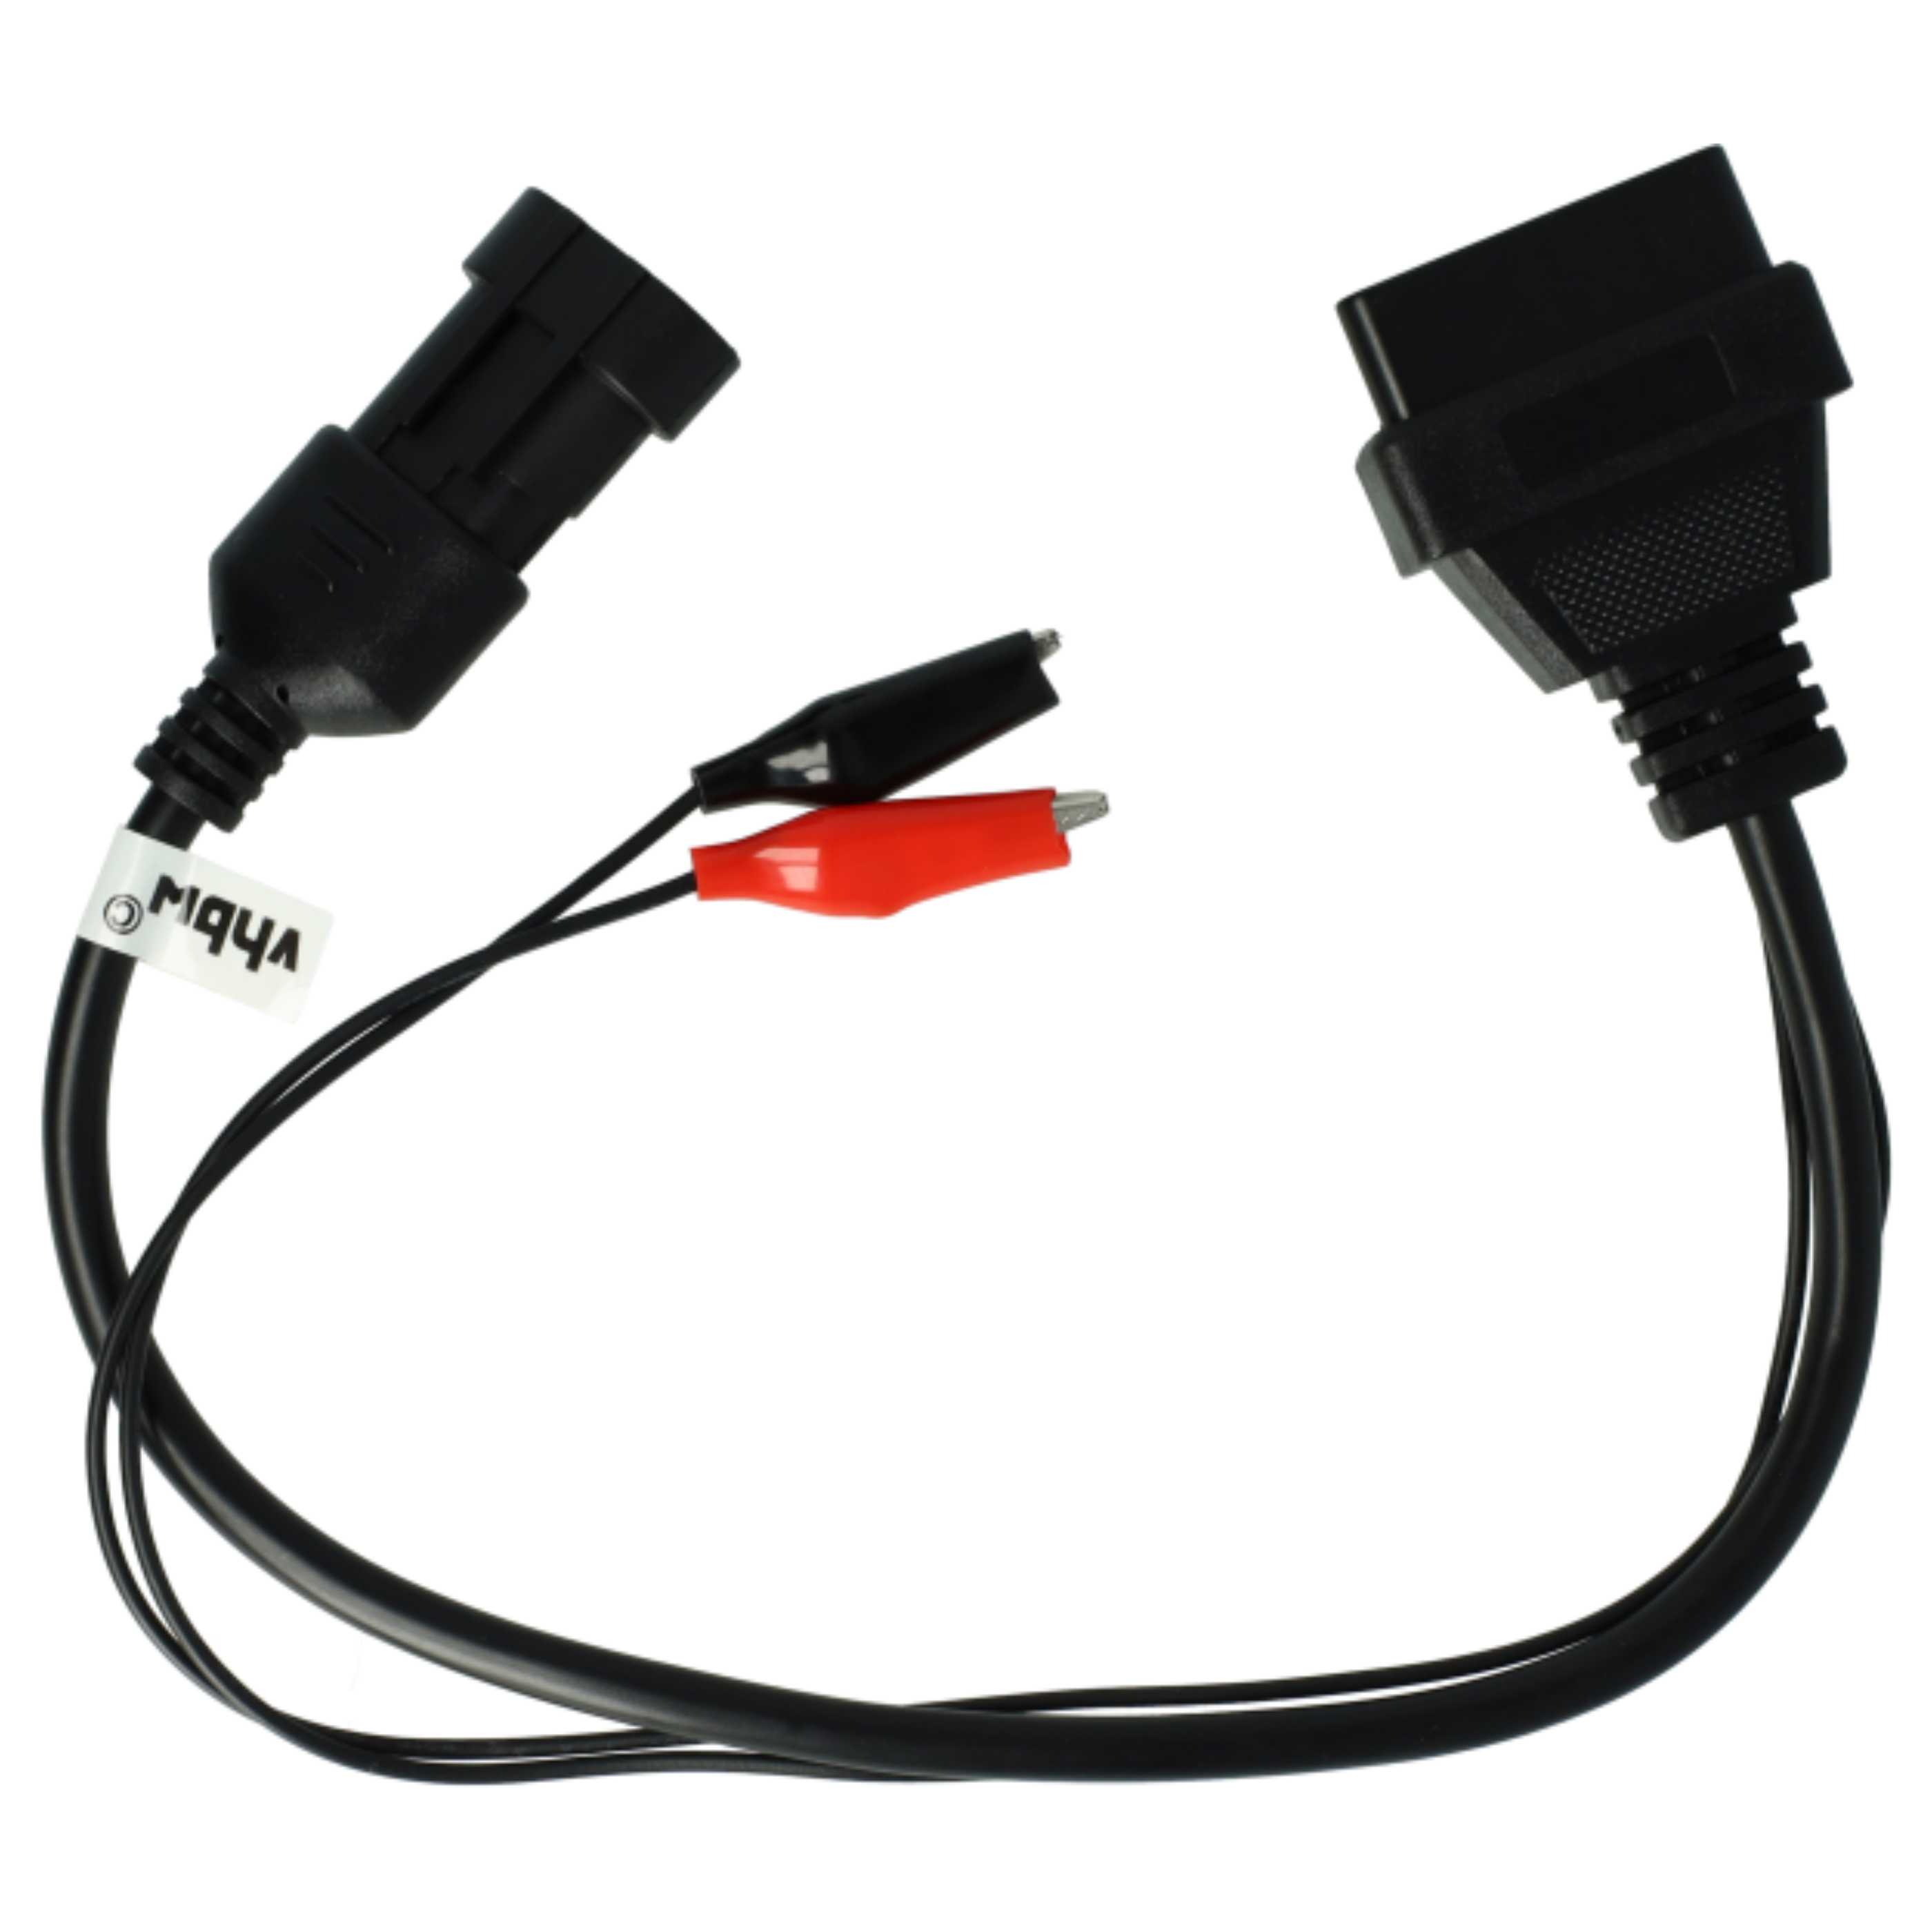 vhbw OBD2 Adapter 3Pin OBD1 to OBD2 suitable for with 2 Pin Plug, with 2 Pin Plug, with 2 Pin Plug Citroen, Pe